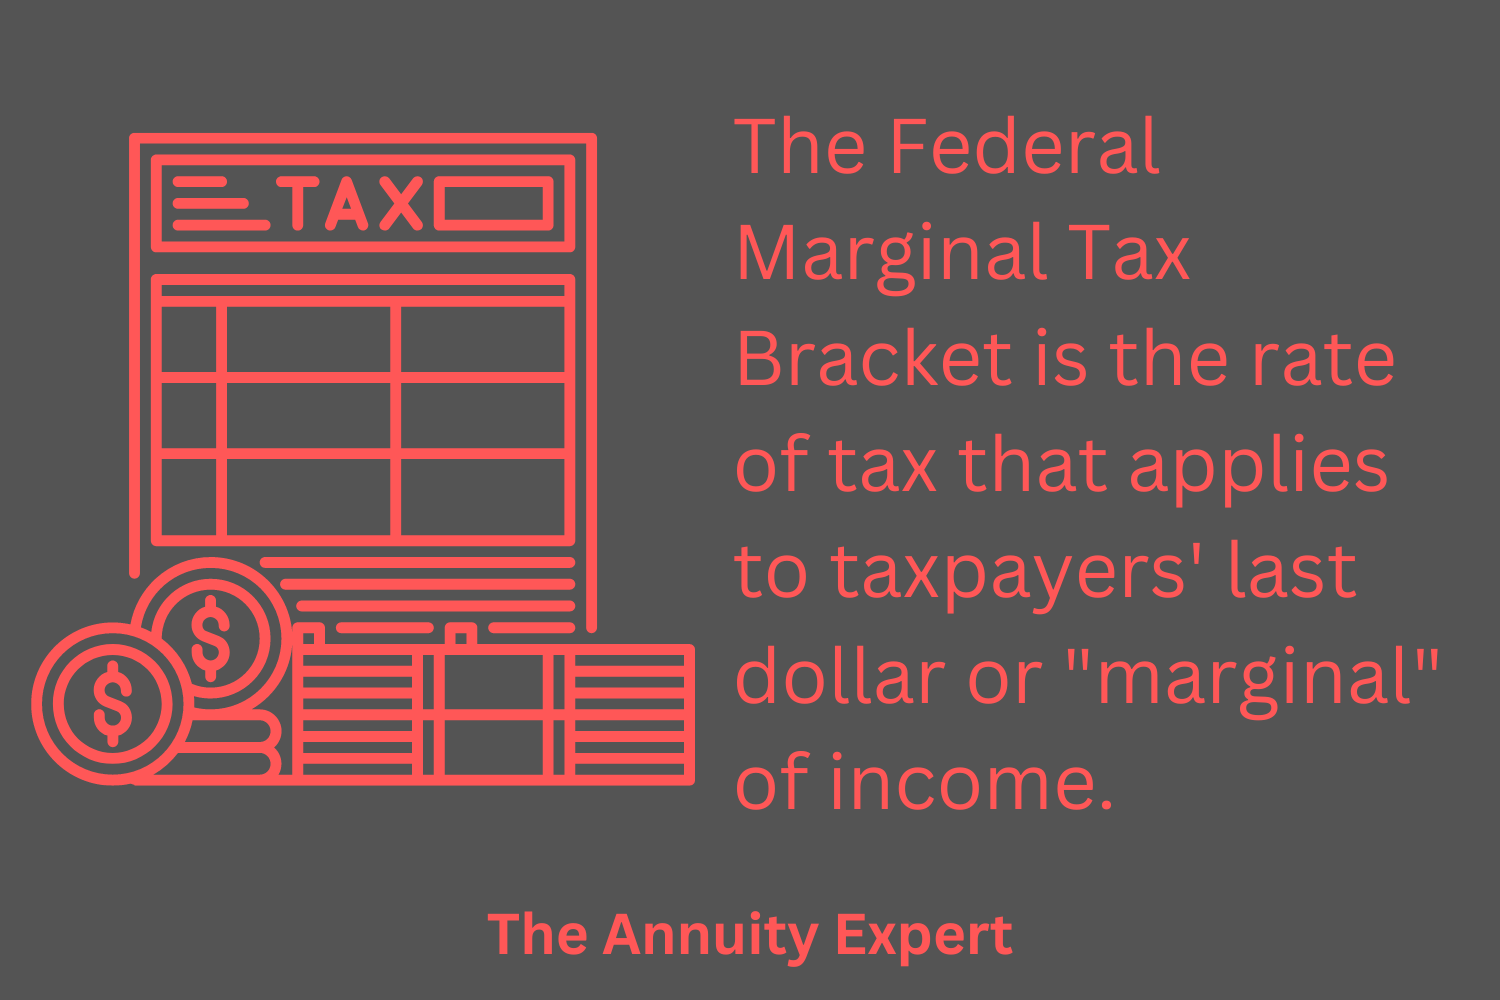 What Is The Federal Marginal Tax Bracket?